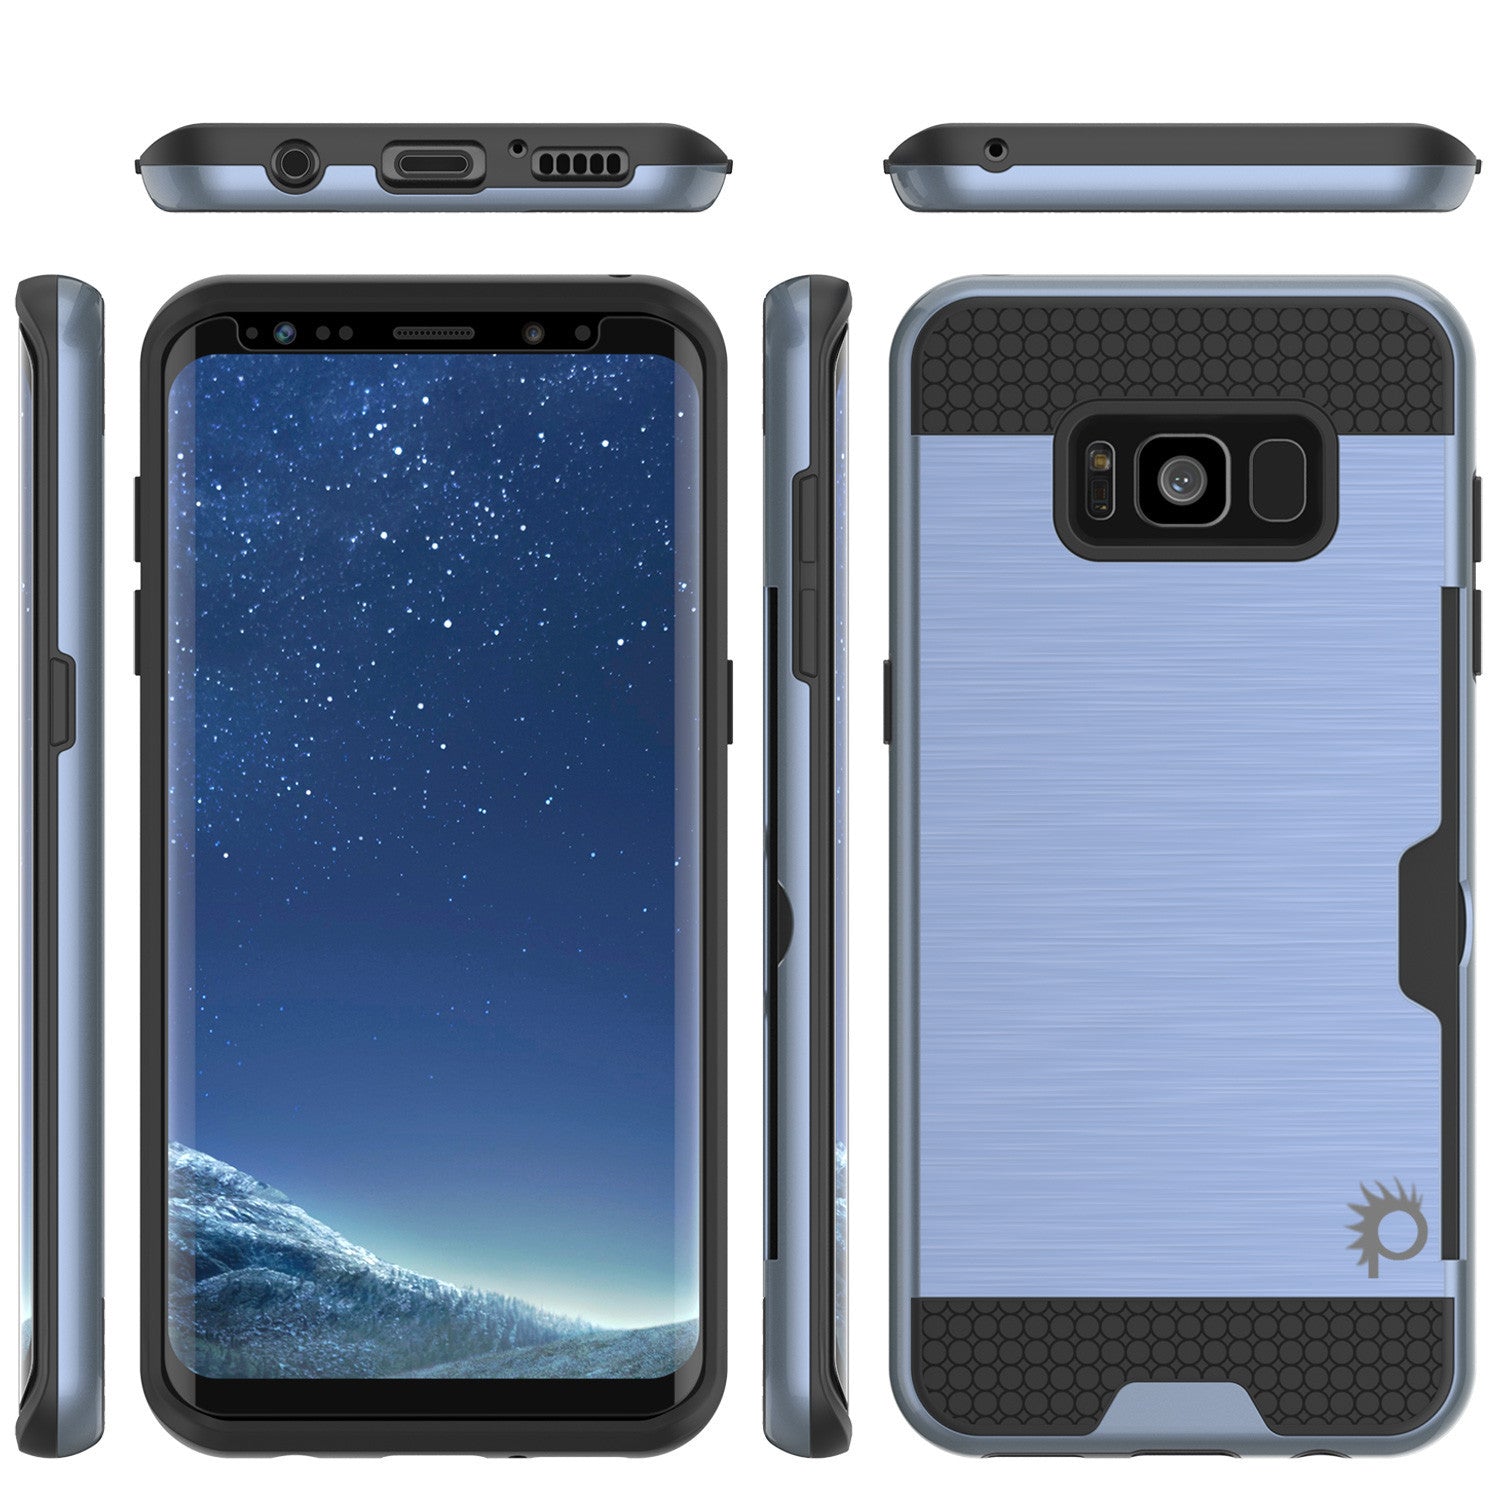 Galaxy S8 Case PunkCase SLOT Navy Series Slim Armor Soft Cover Case